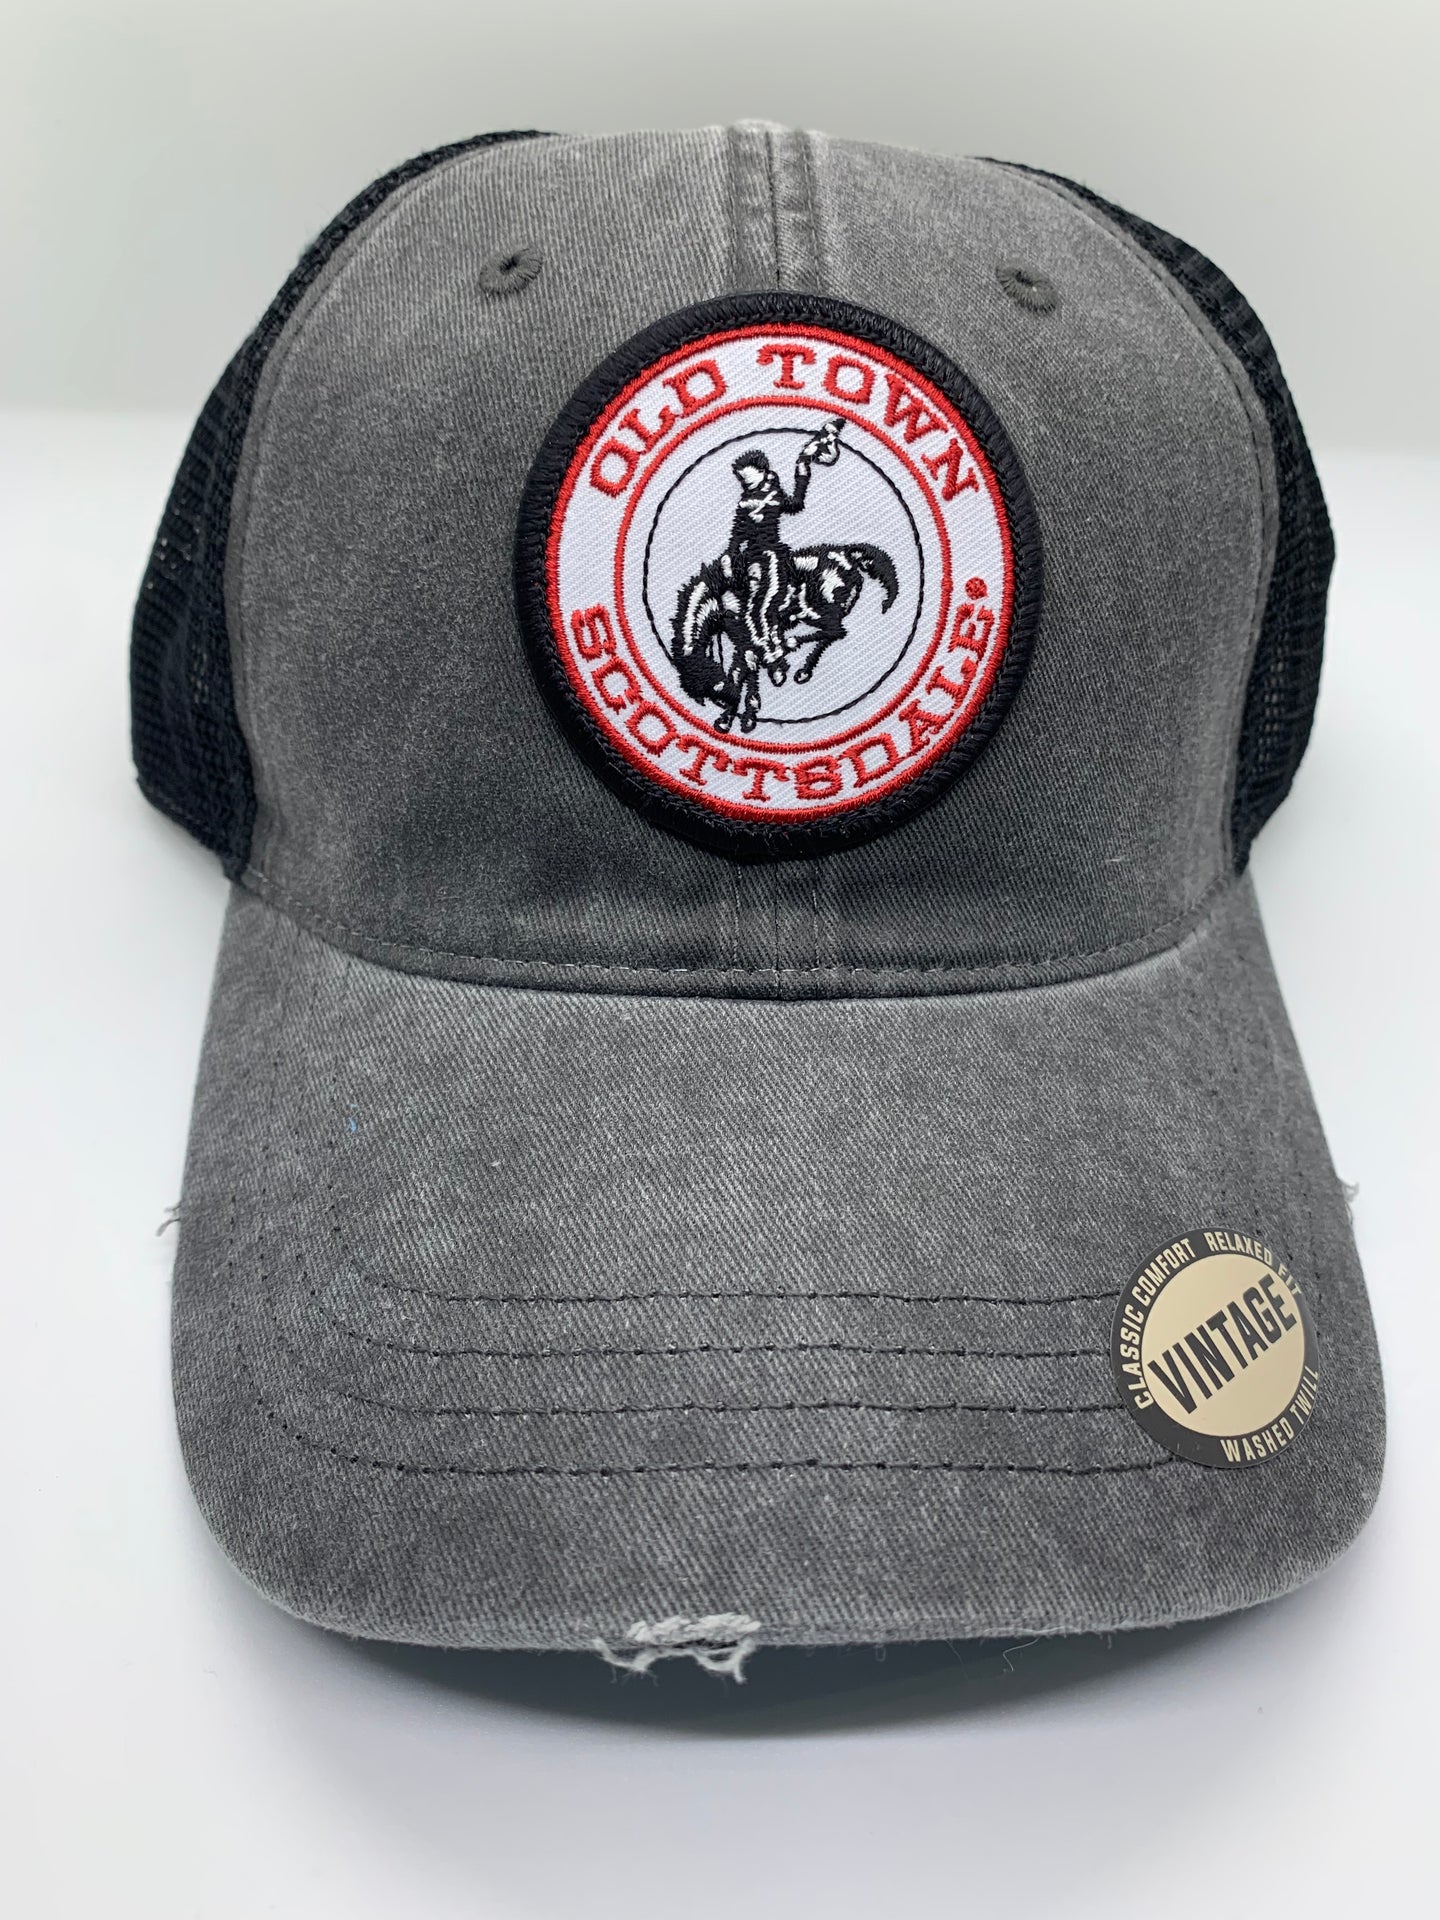 G54 Old Town Scottsdale Vintage Gray and Black Trucker Hat